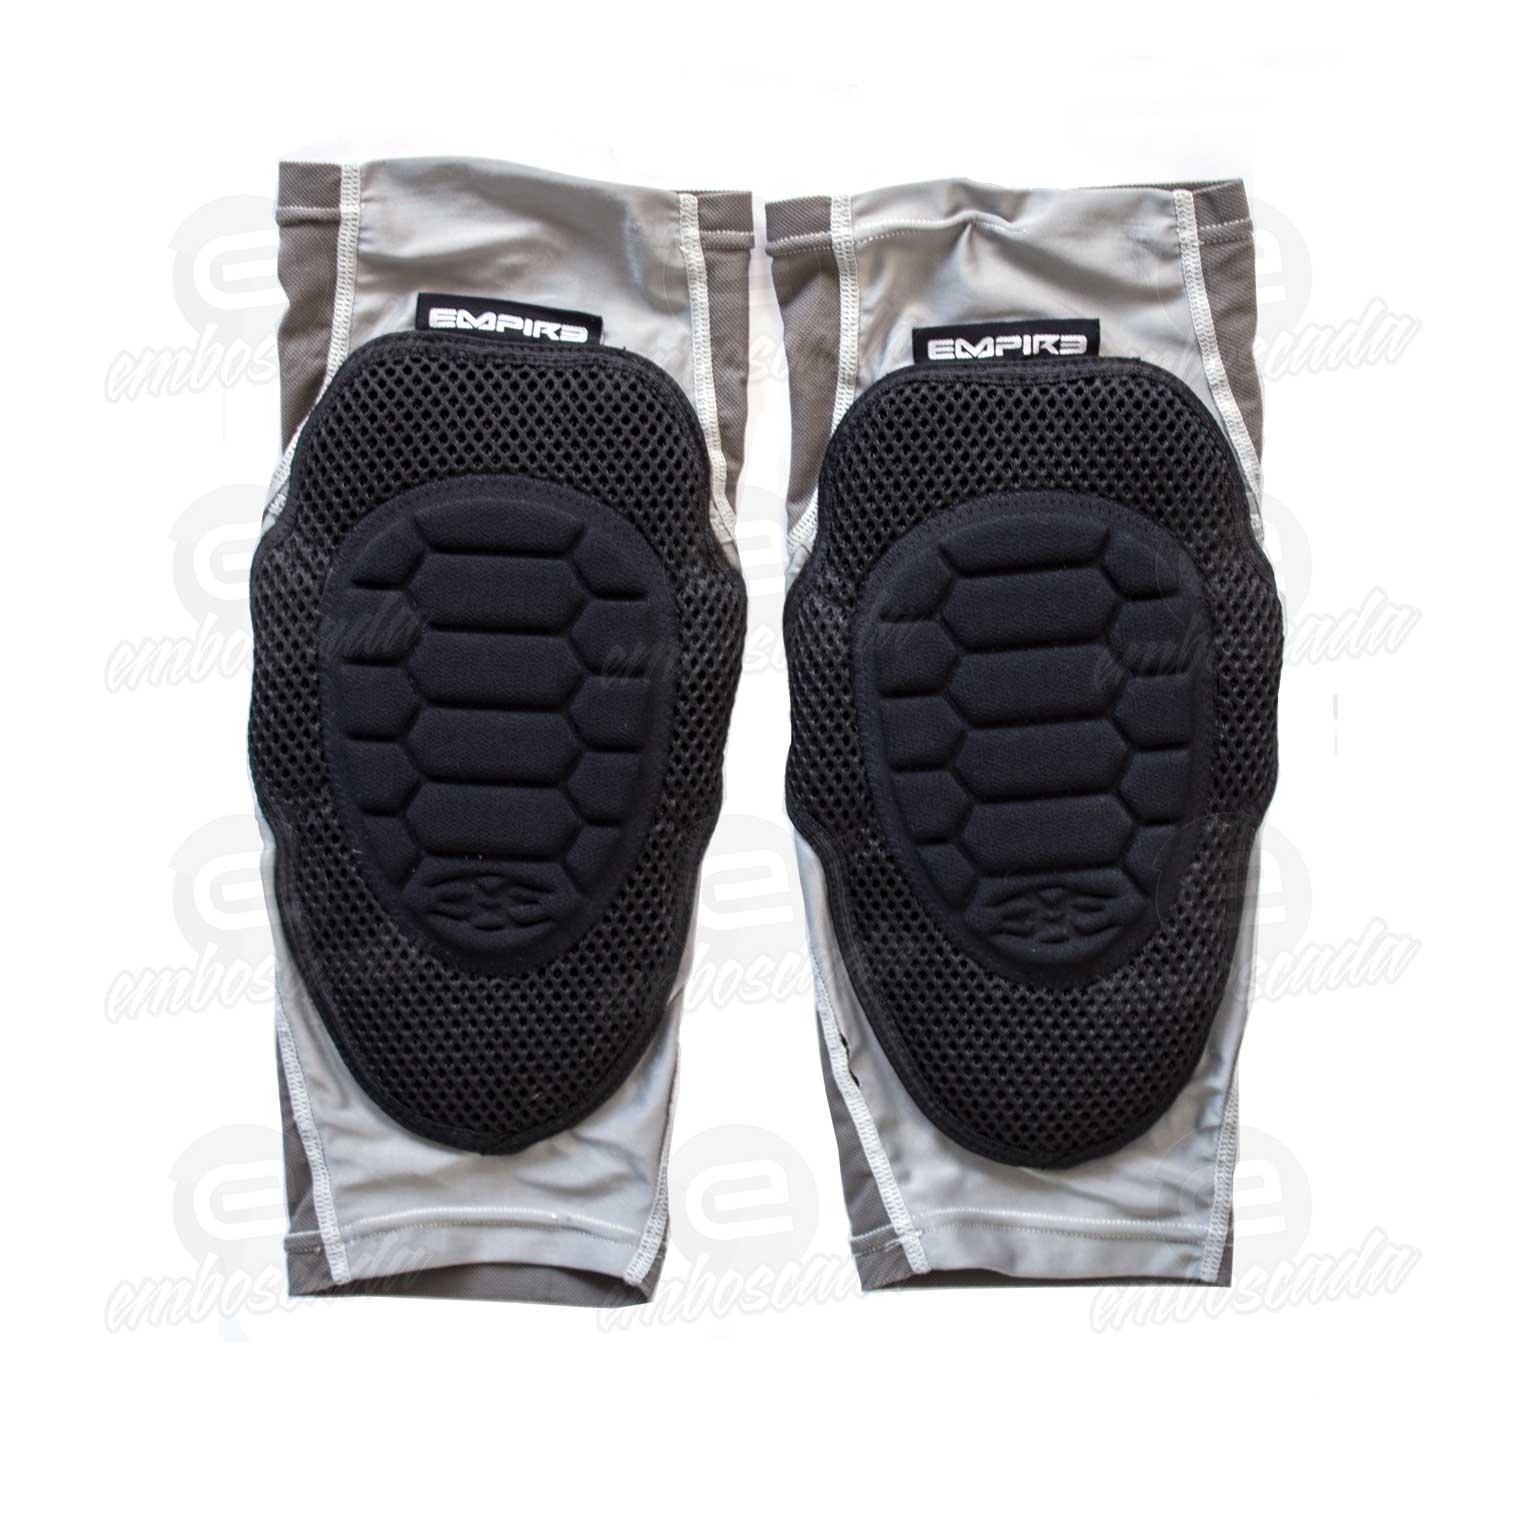 Used Knee Pads Empire neoskin